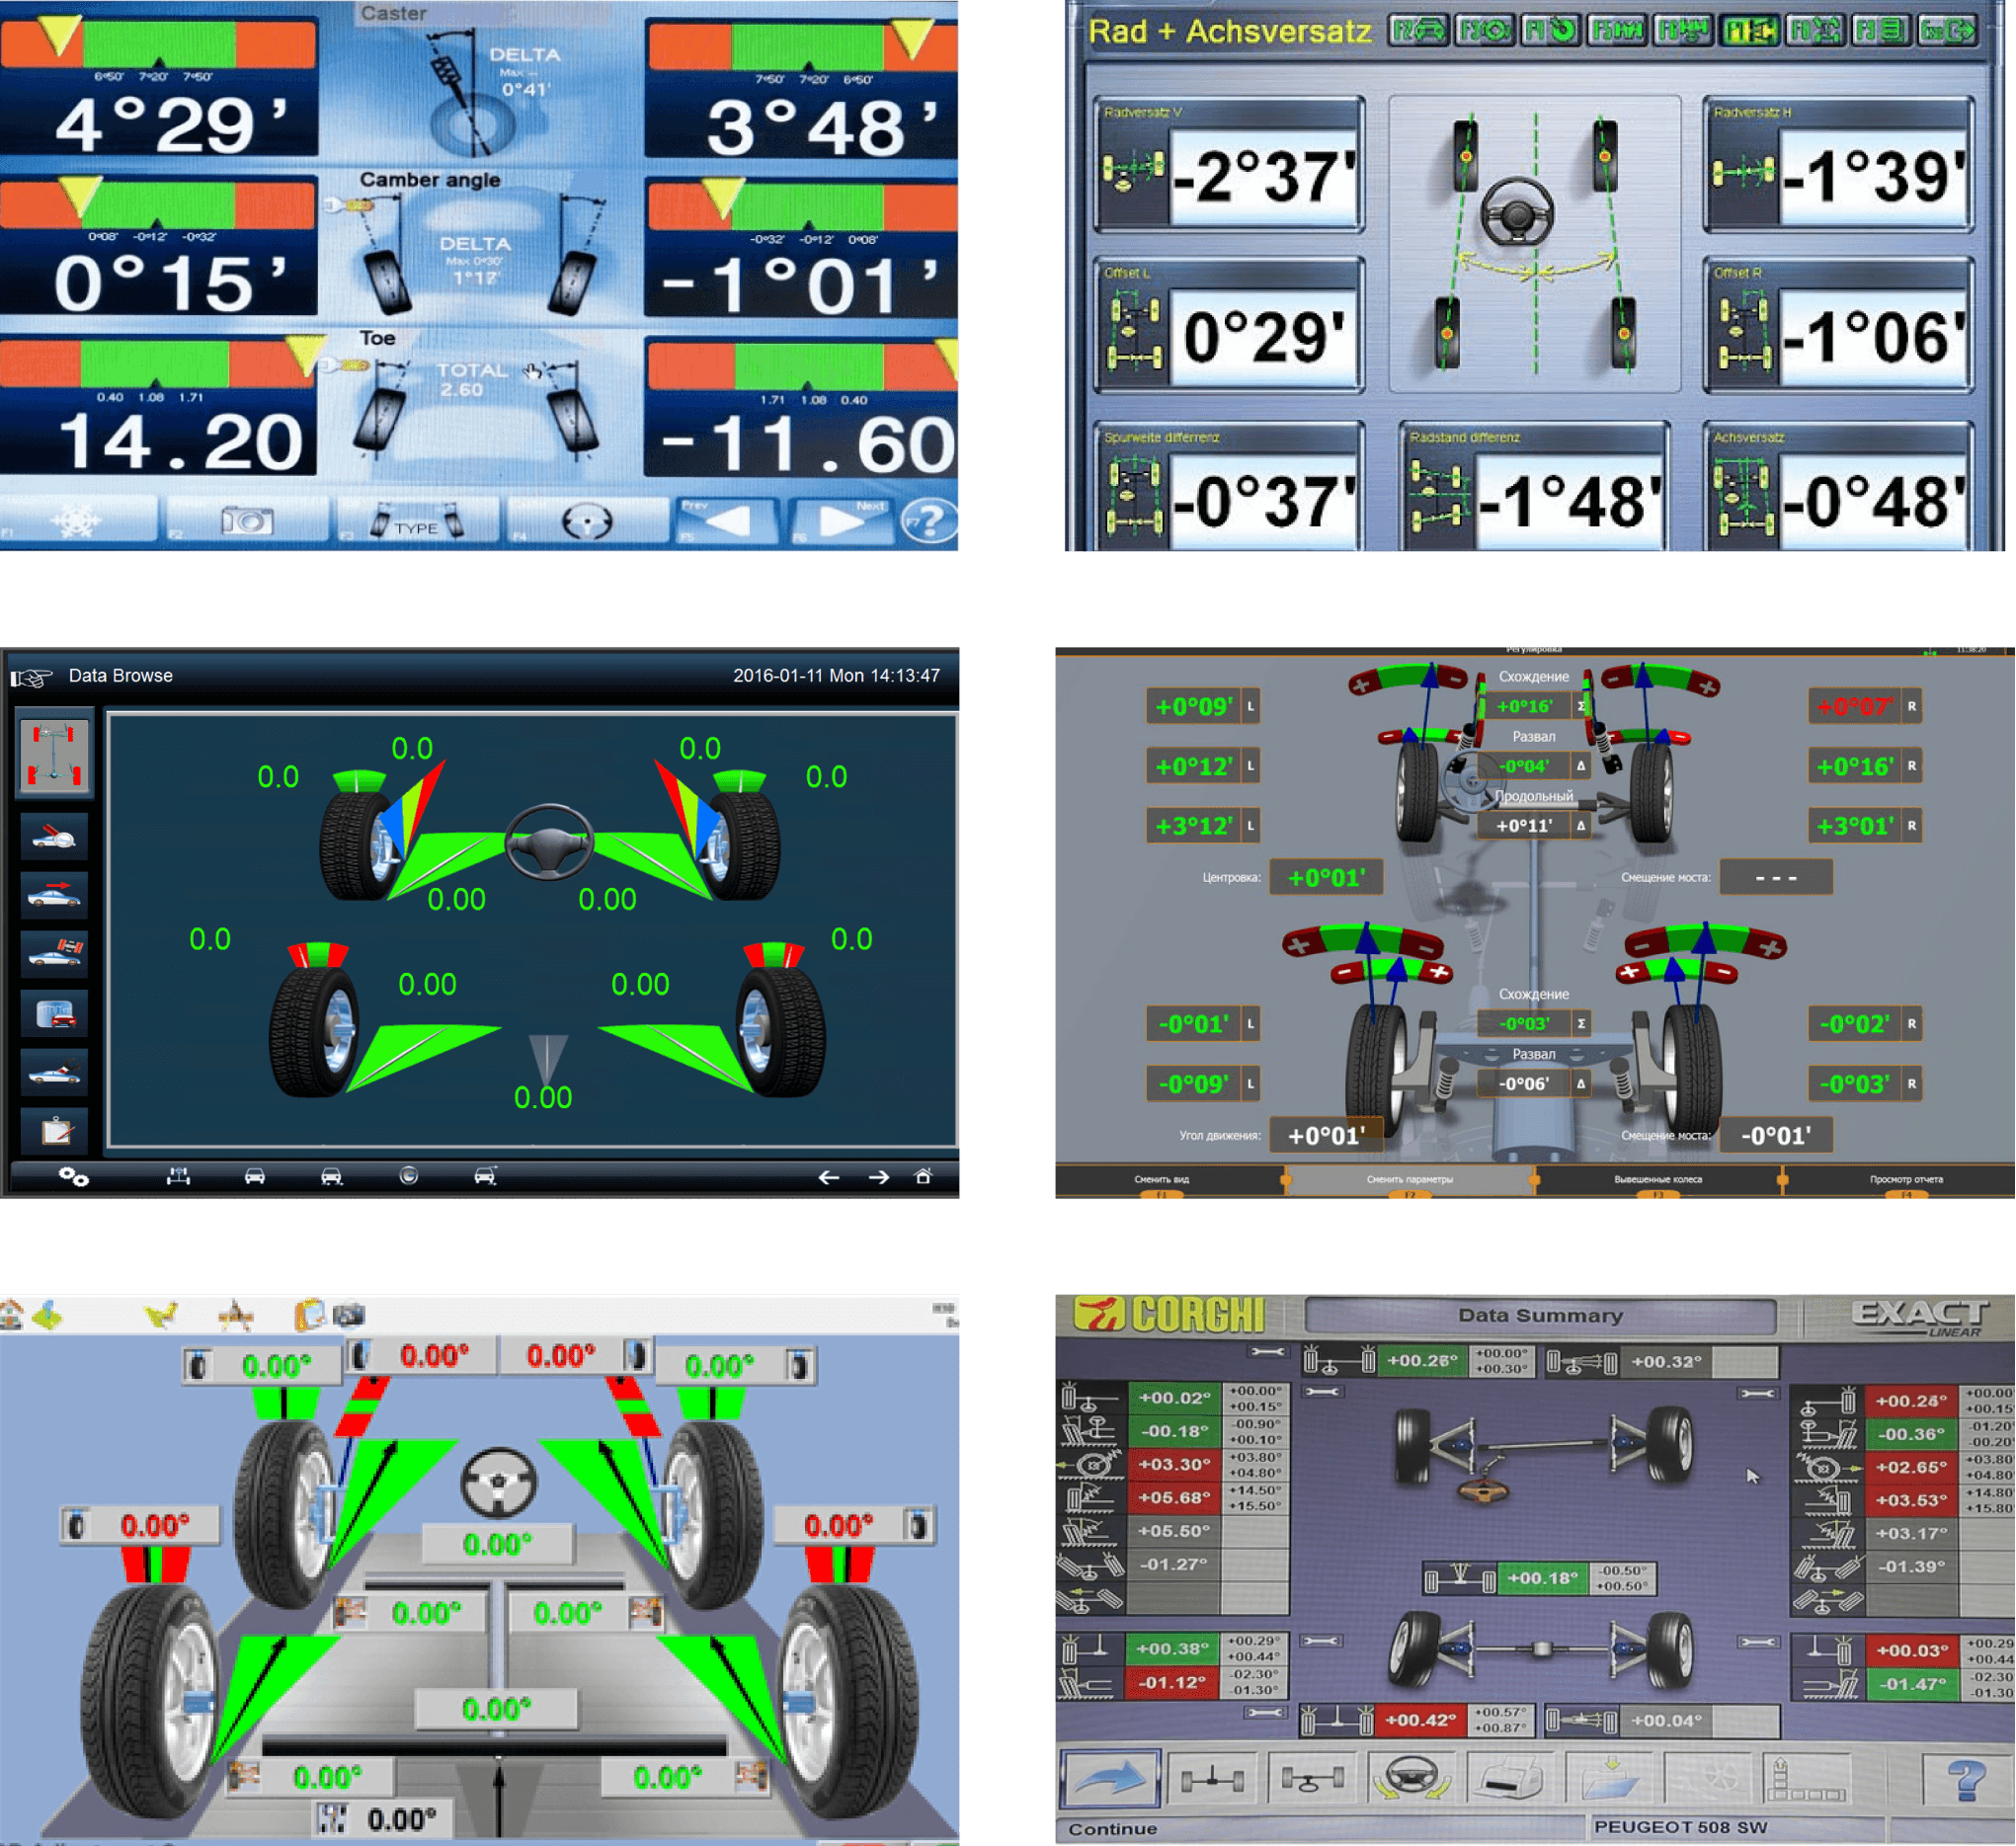 Six embedded GUI design benchmarking examples in comparison.